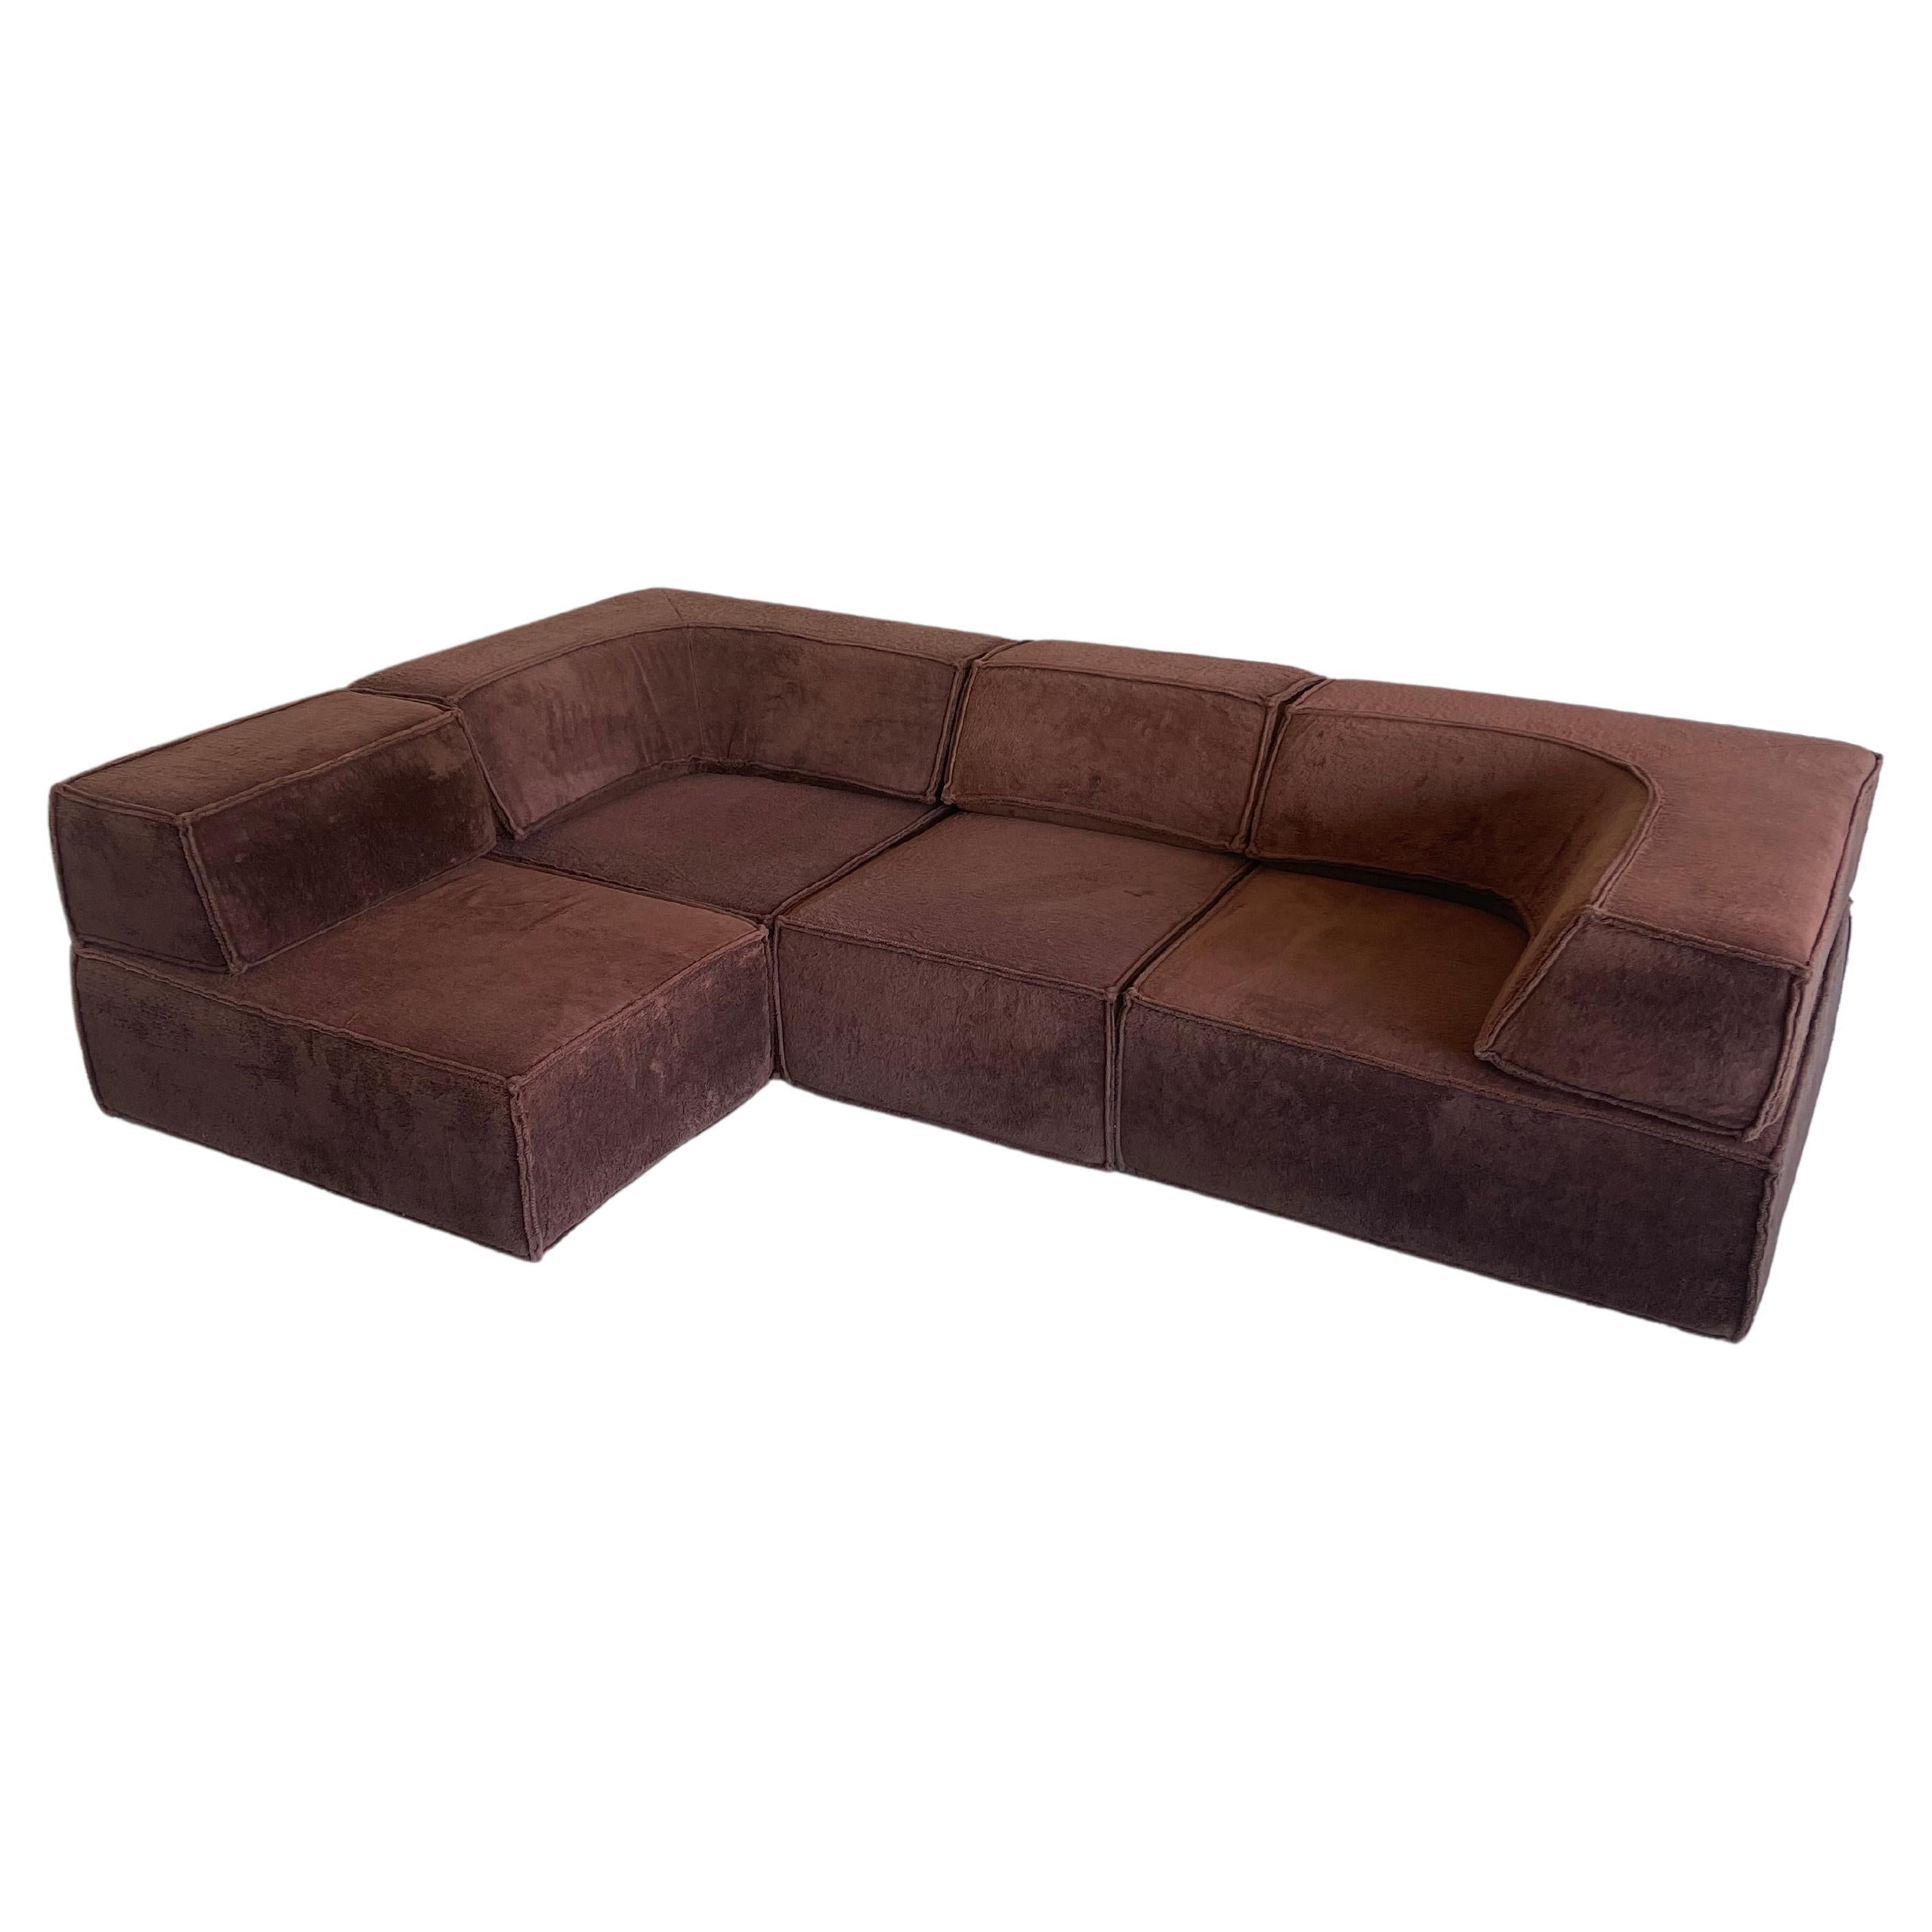 All-foam “Trio” sofa by design duo Team Form AG for German manufacturer COR. Custom reddish brown teddy fabric designed specifically for the Trio. 

Designed to represent maximum mobility, the sofa is comprised of fully modular seats, backrests, and